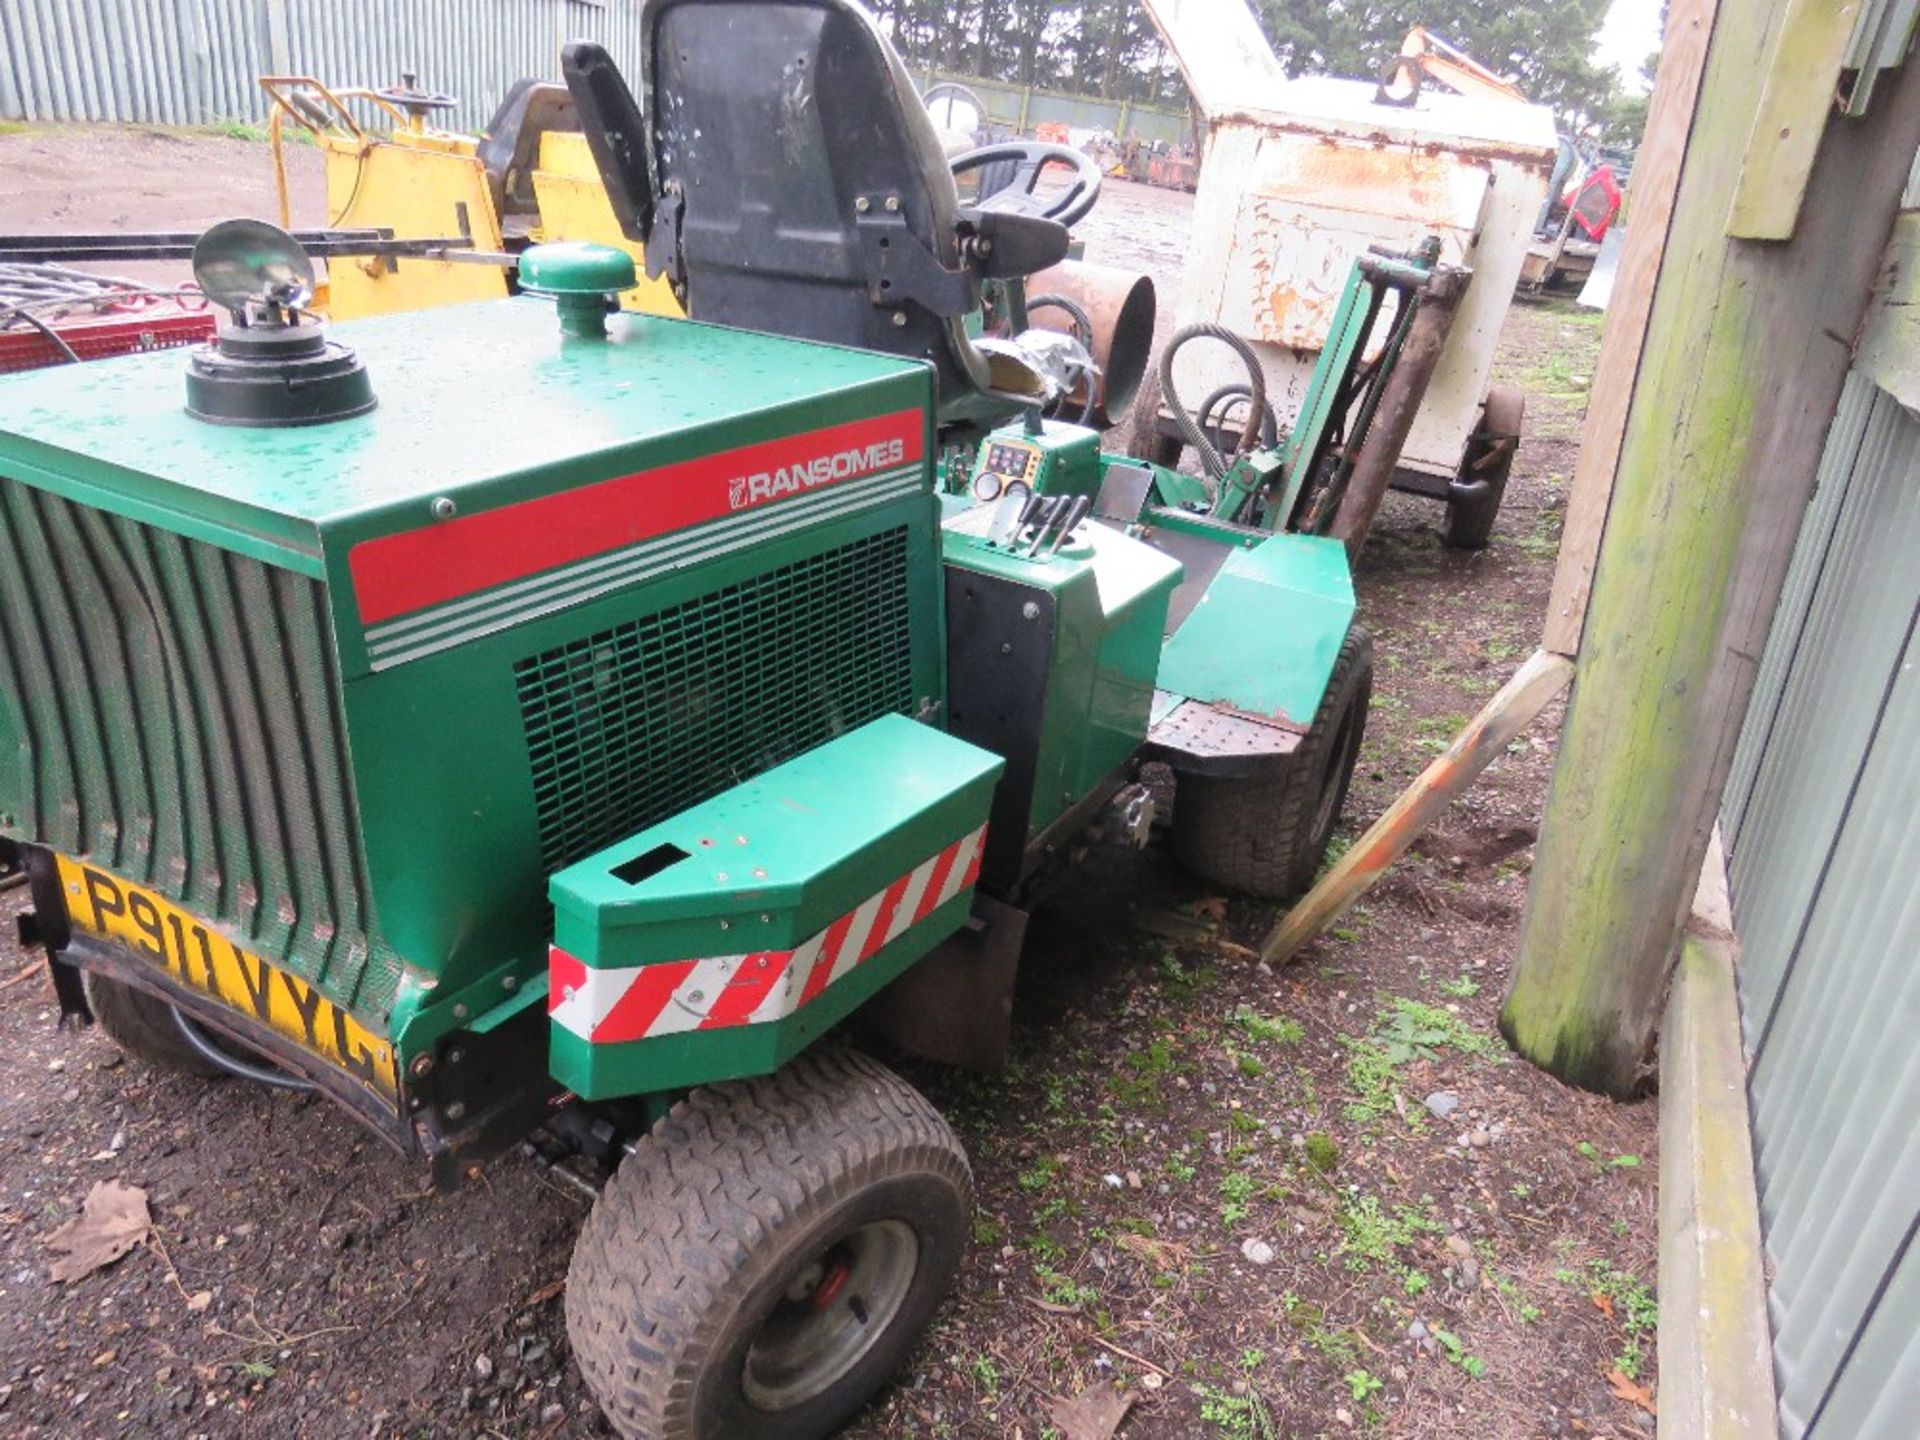 RANSOMES 213 TRIPLE RIDE ON CYLINDER MOWER WITH KUBOTA ENGINE. WHEN TESTED WAS SEEN TO RUN, DRIVE, M - Image 6 of 10